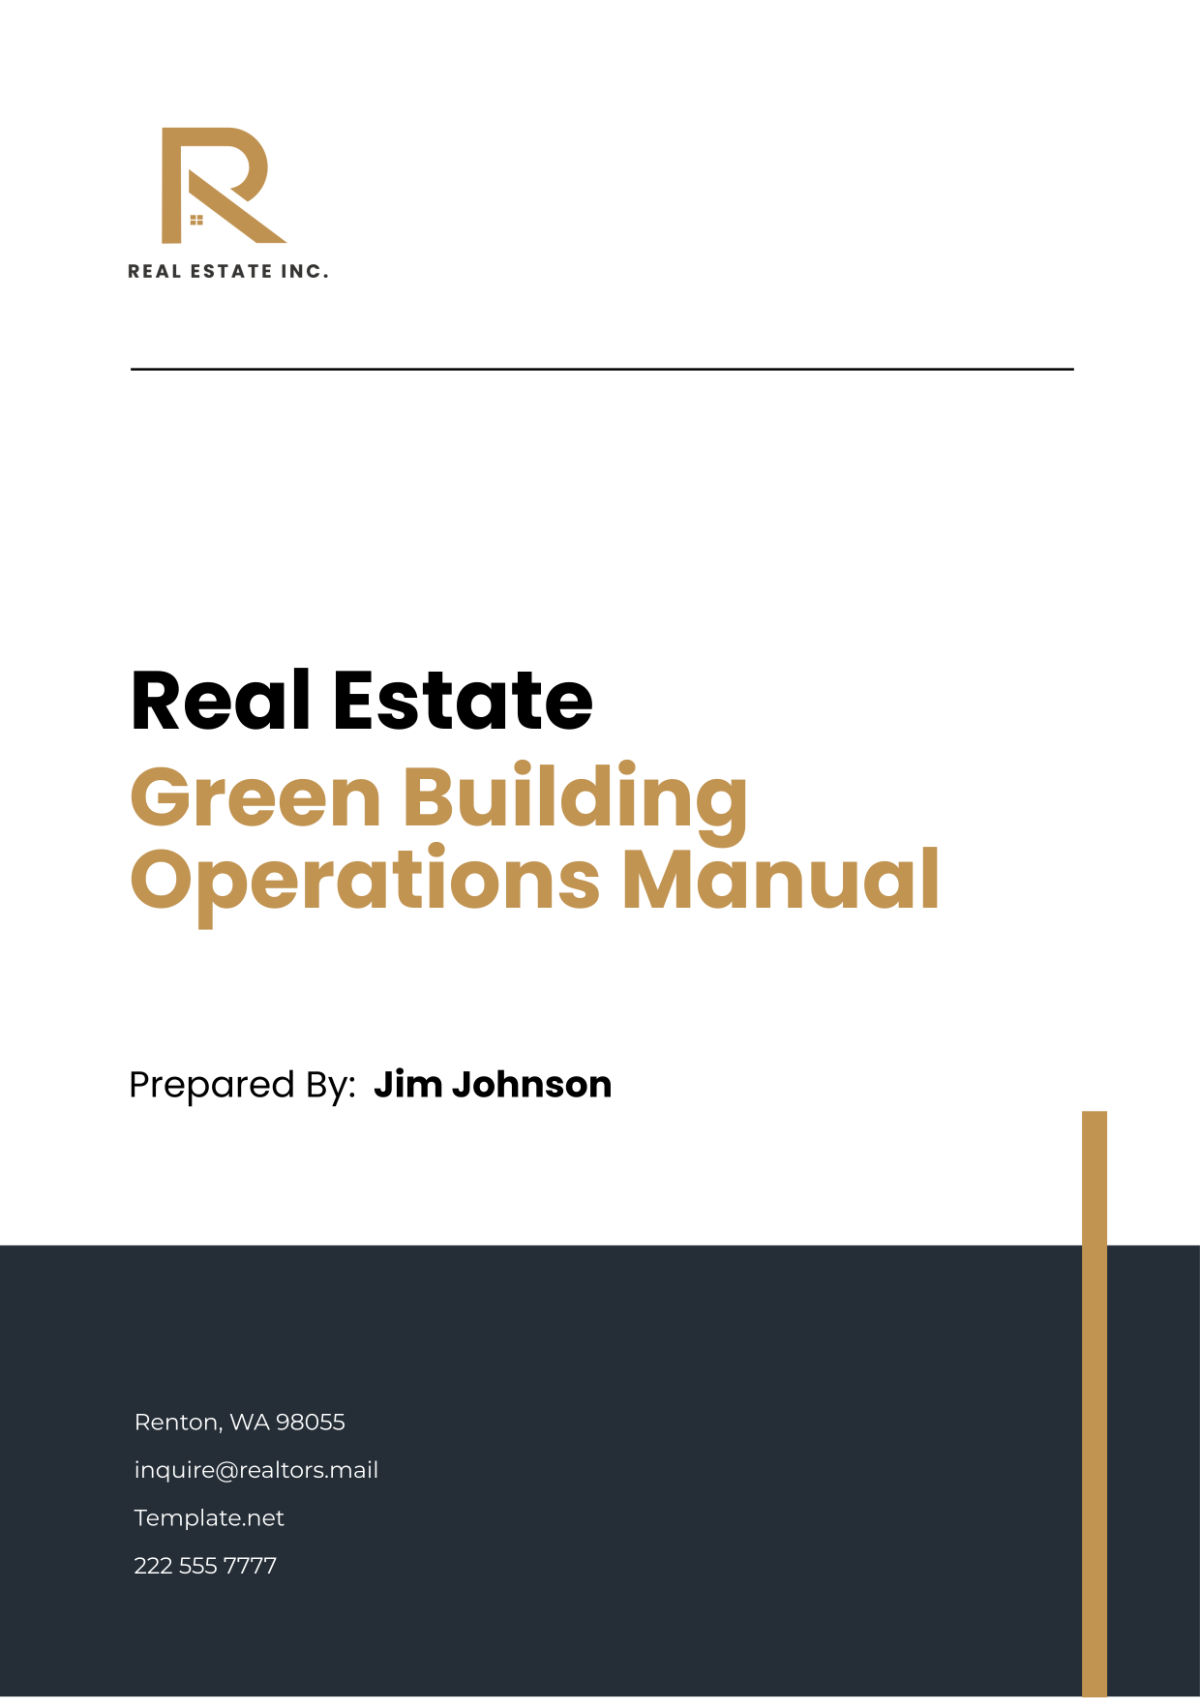 Real Estate Green Building Operations Manual Template